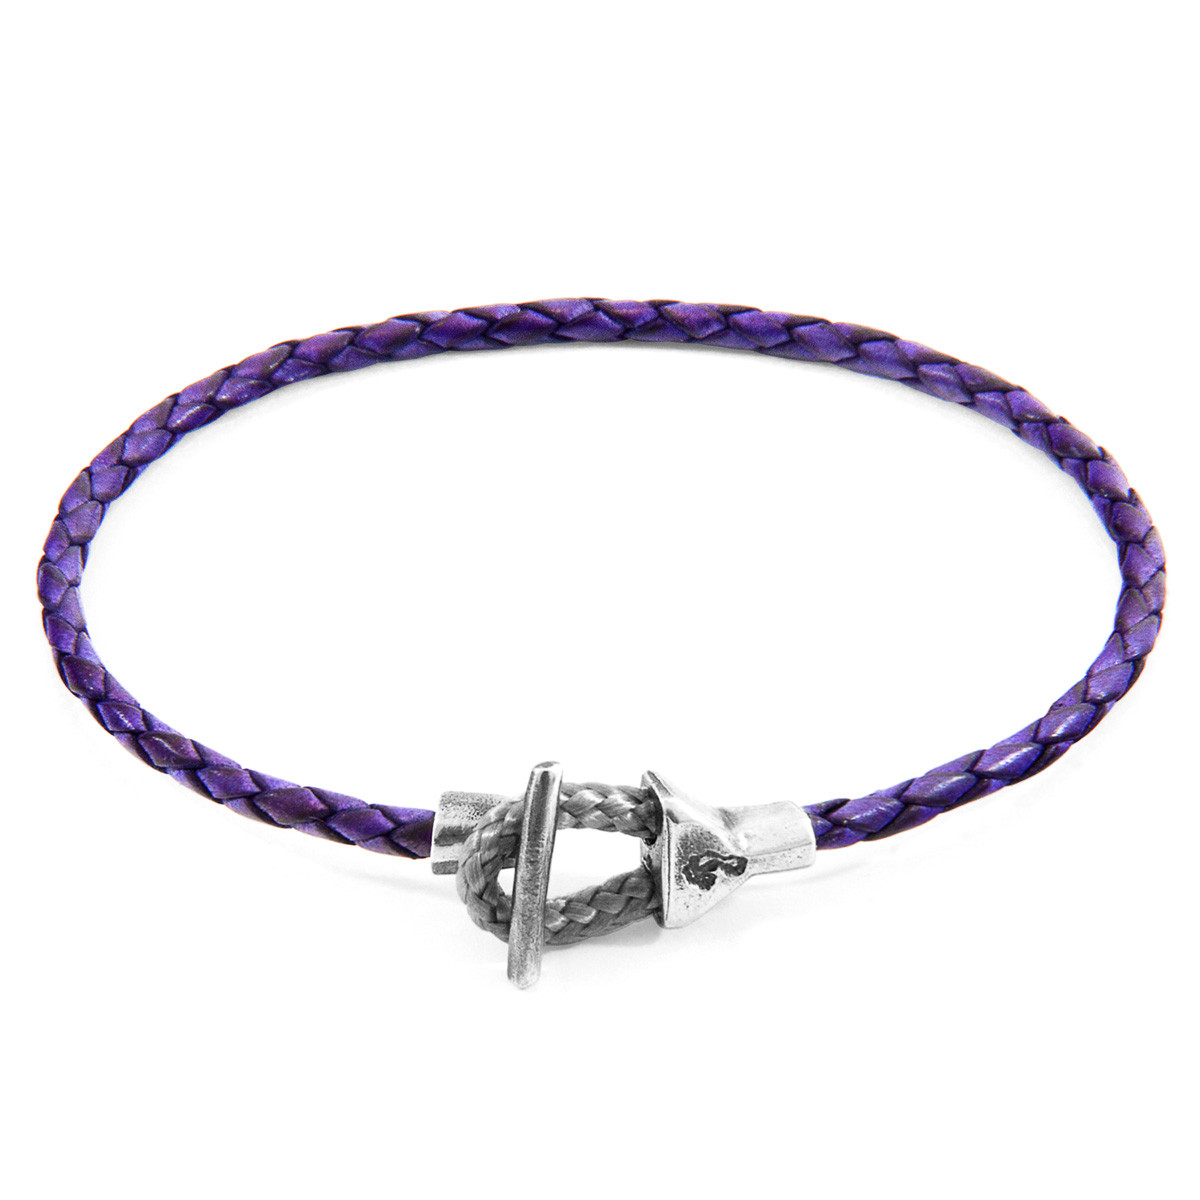 Grape Purple Cullen Silver and Braided Leather Bracelet